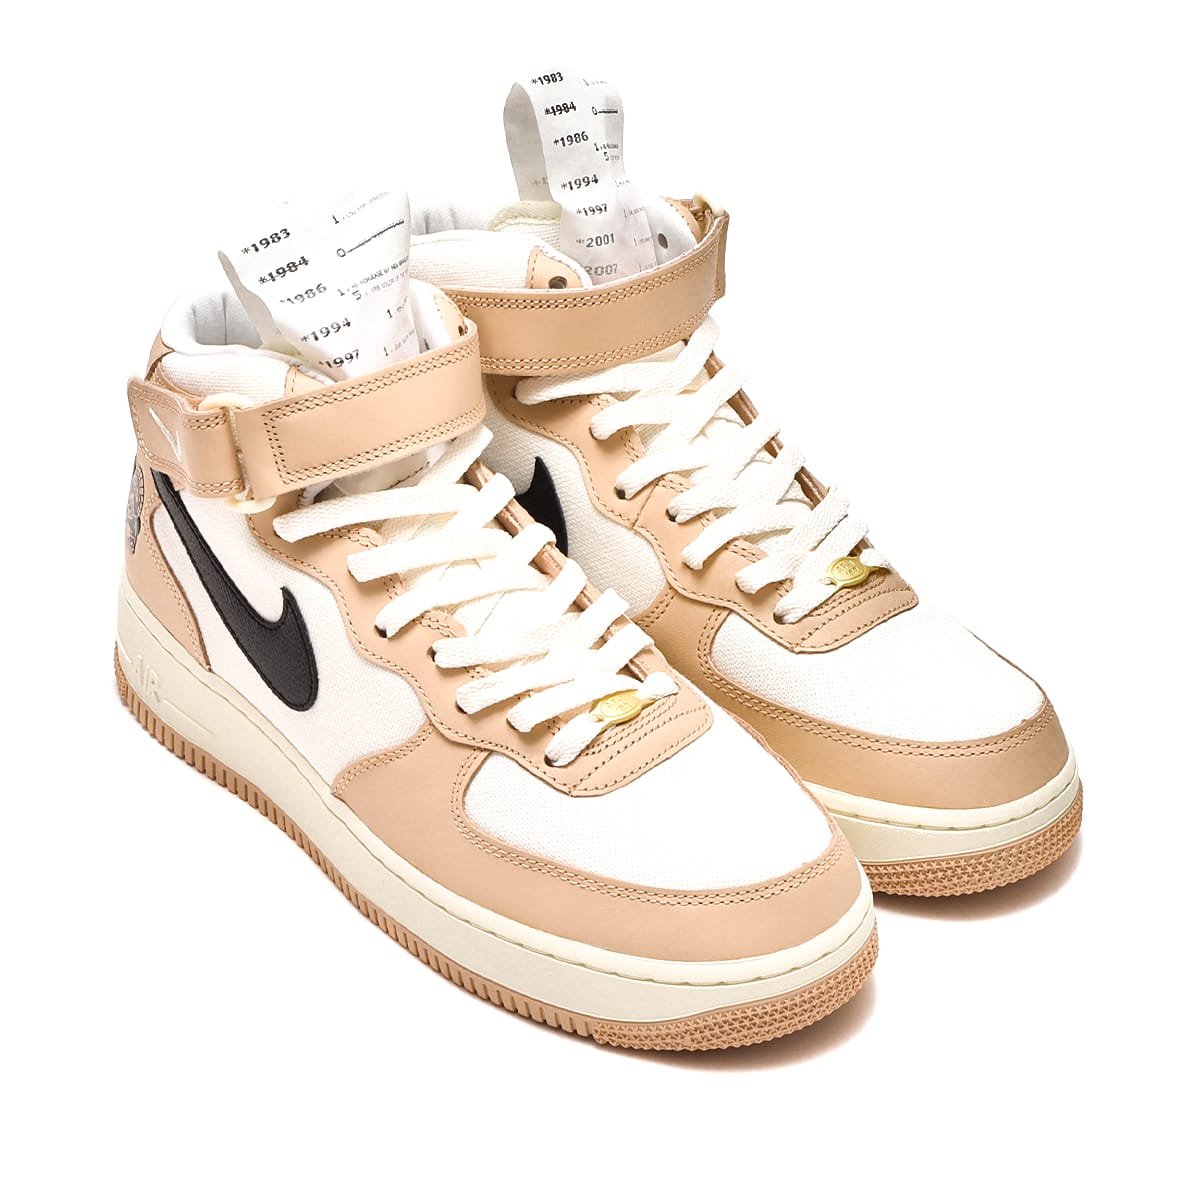 NIKE AIR FORCE 1 MID '07 SHIMMER/BLACK-PALE IVORY-COCONUT MILK